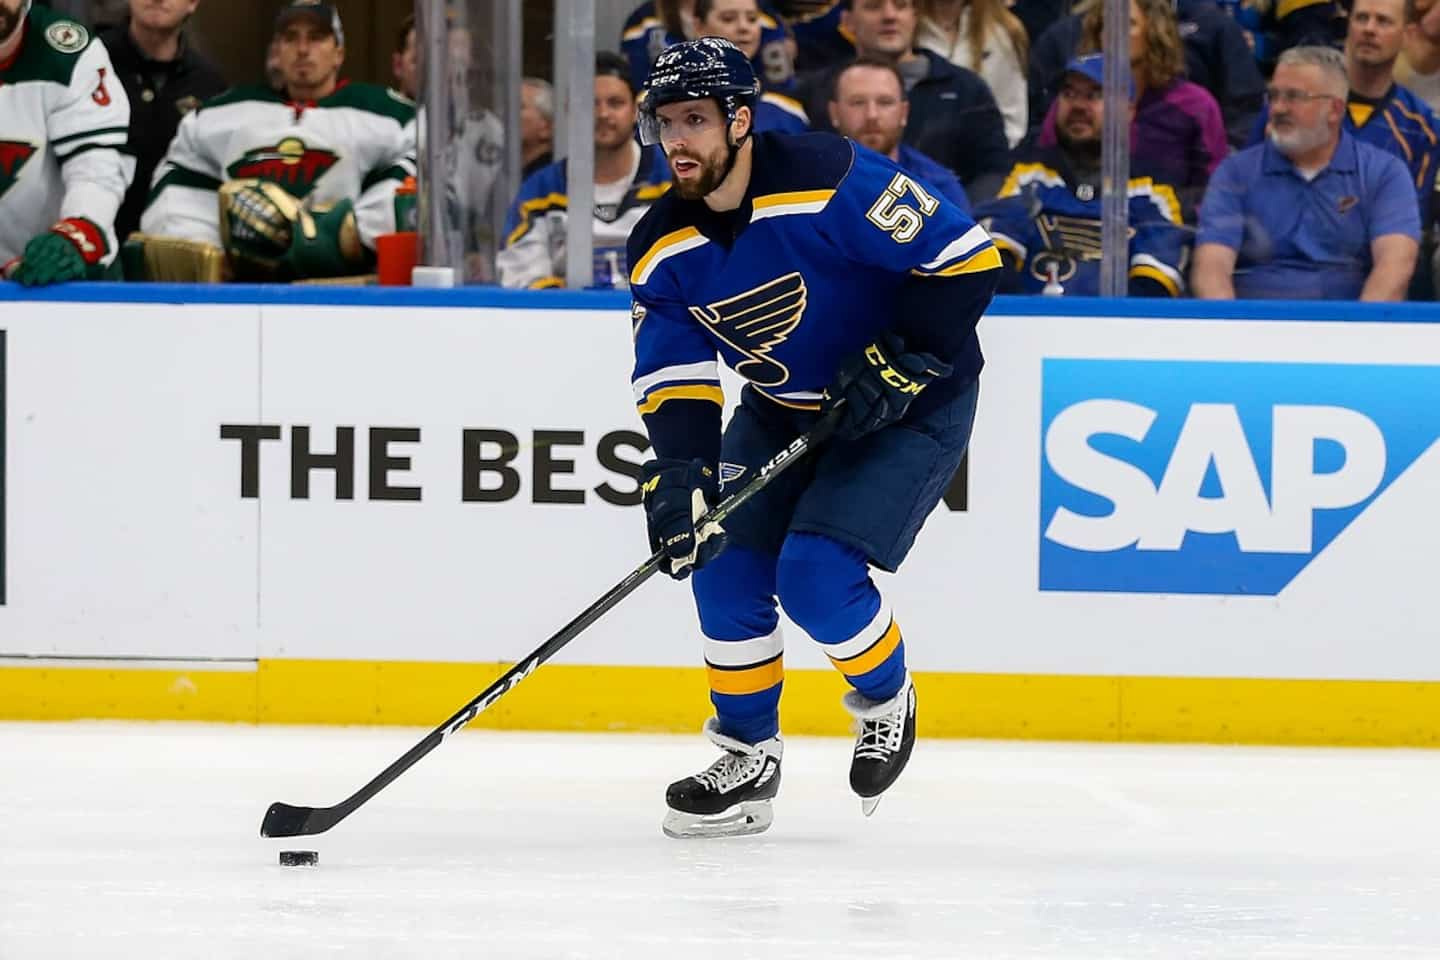 David Perron wants to stay in St. Louis